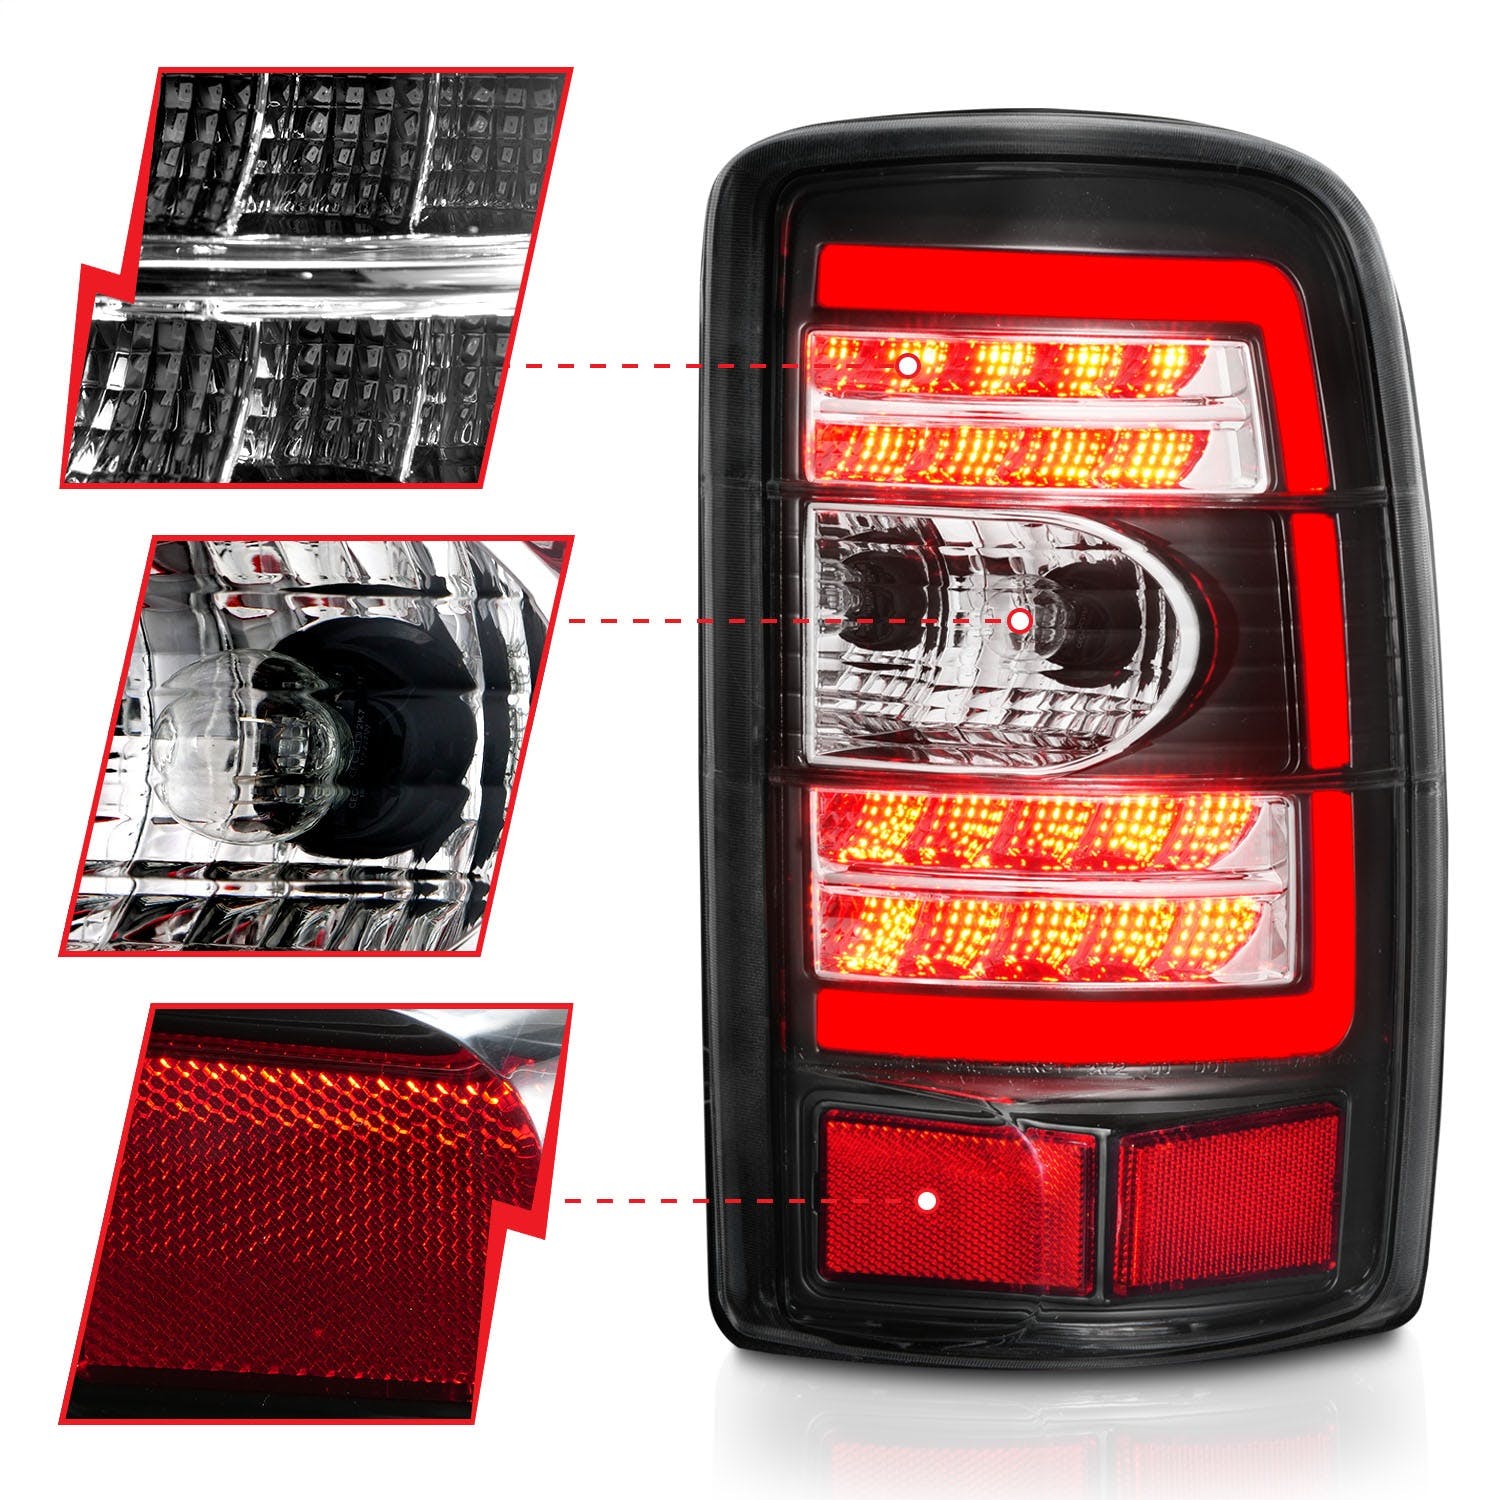 AnzoUSA 311362 LED Tail Light with Clear Lens Black Housing